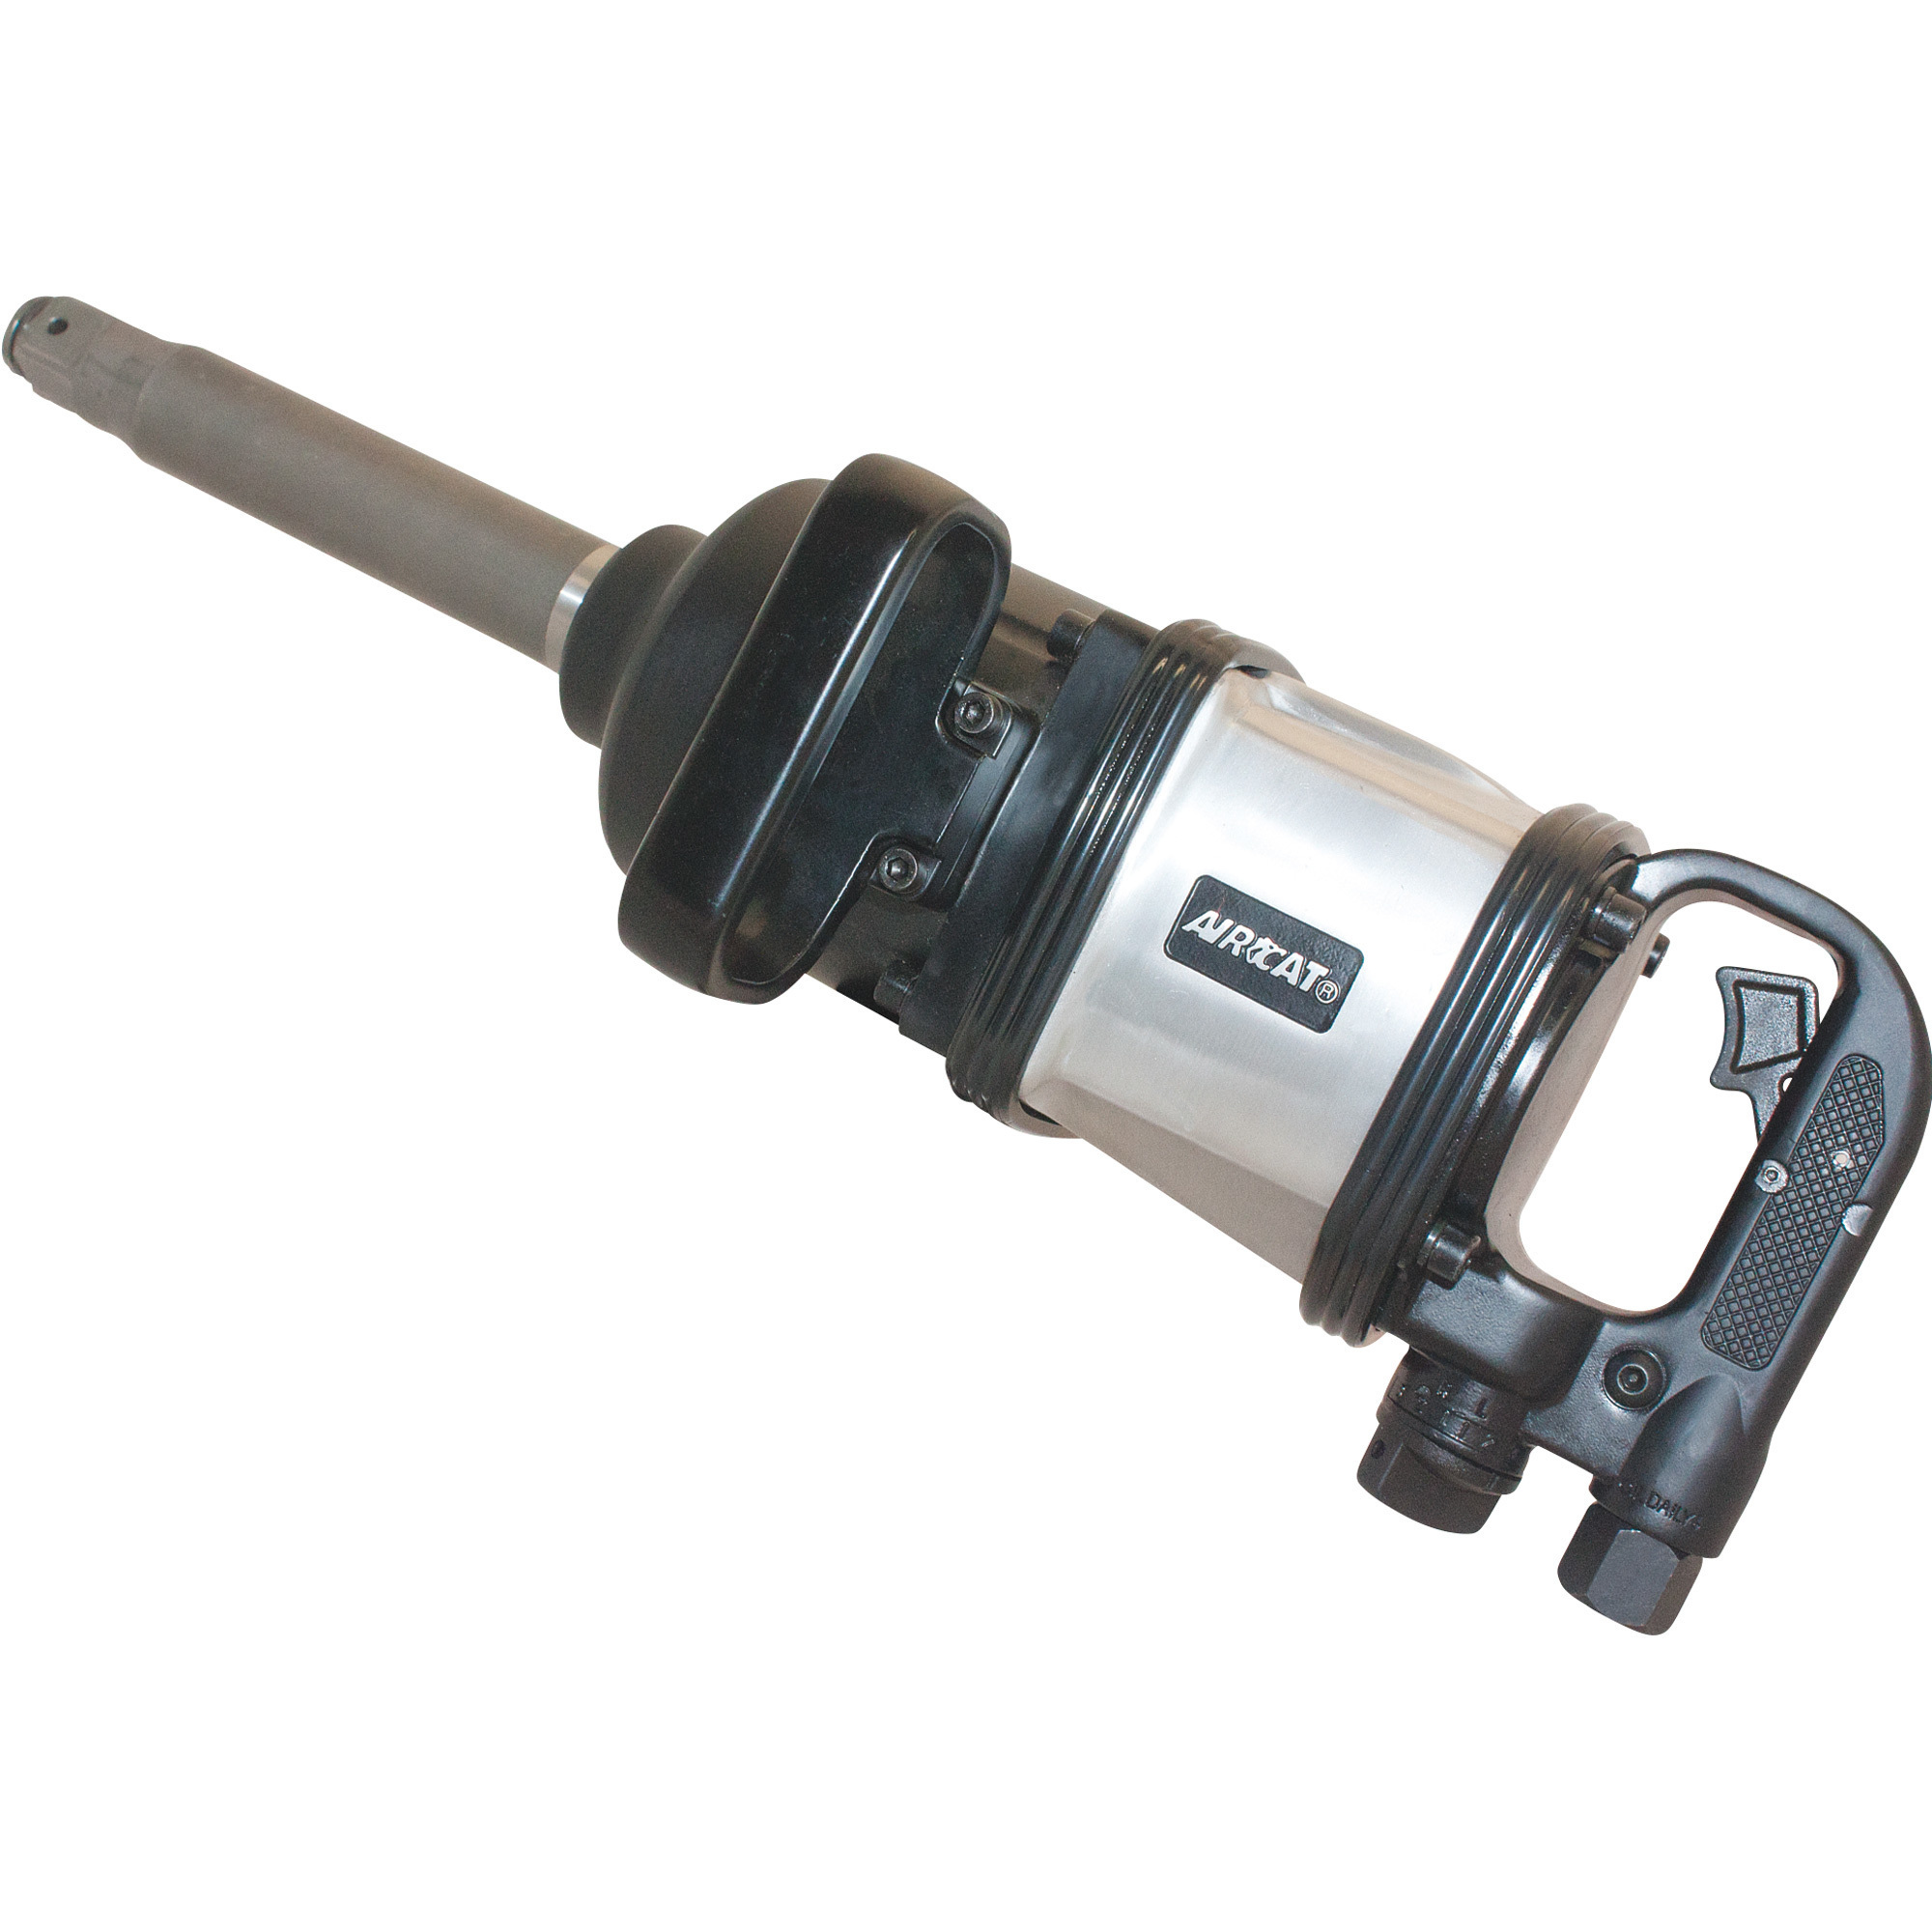 AIRCAT Super-Duty Air Impact Wrench, 1Inch Drive, 8Inch Anvil, 2300 Ft./Lbs. Torque, Model 1994